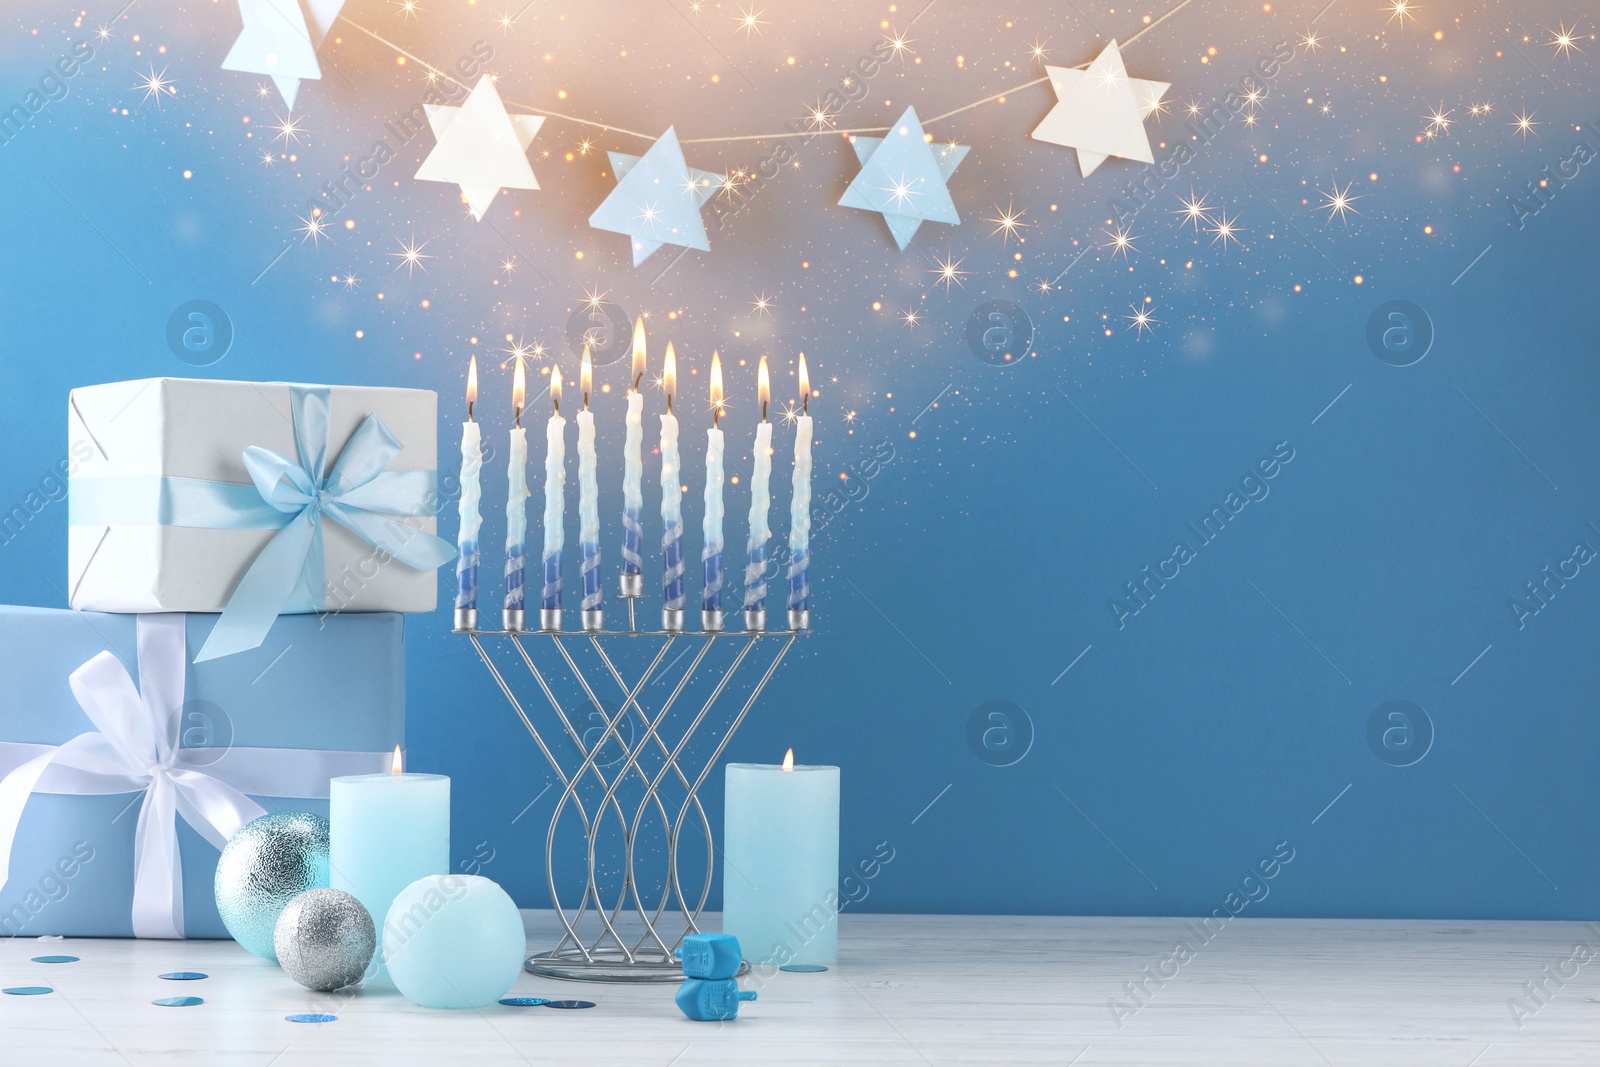 Image of Hanukkah celebration. Menorah, burning candles, dreidels and gift boxes on white wooden table against light blue background, space for text